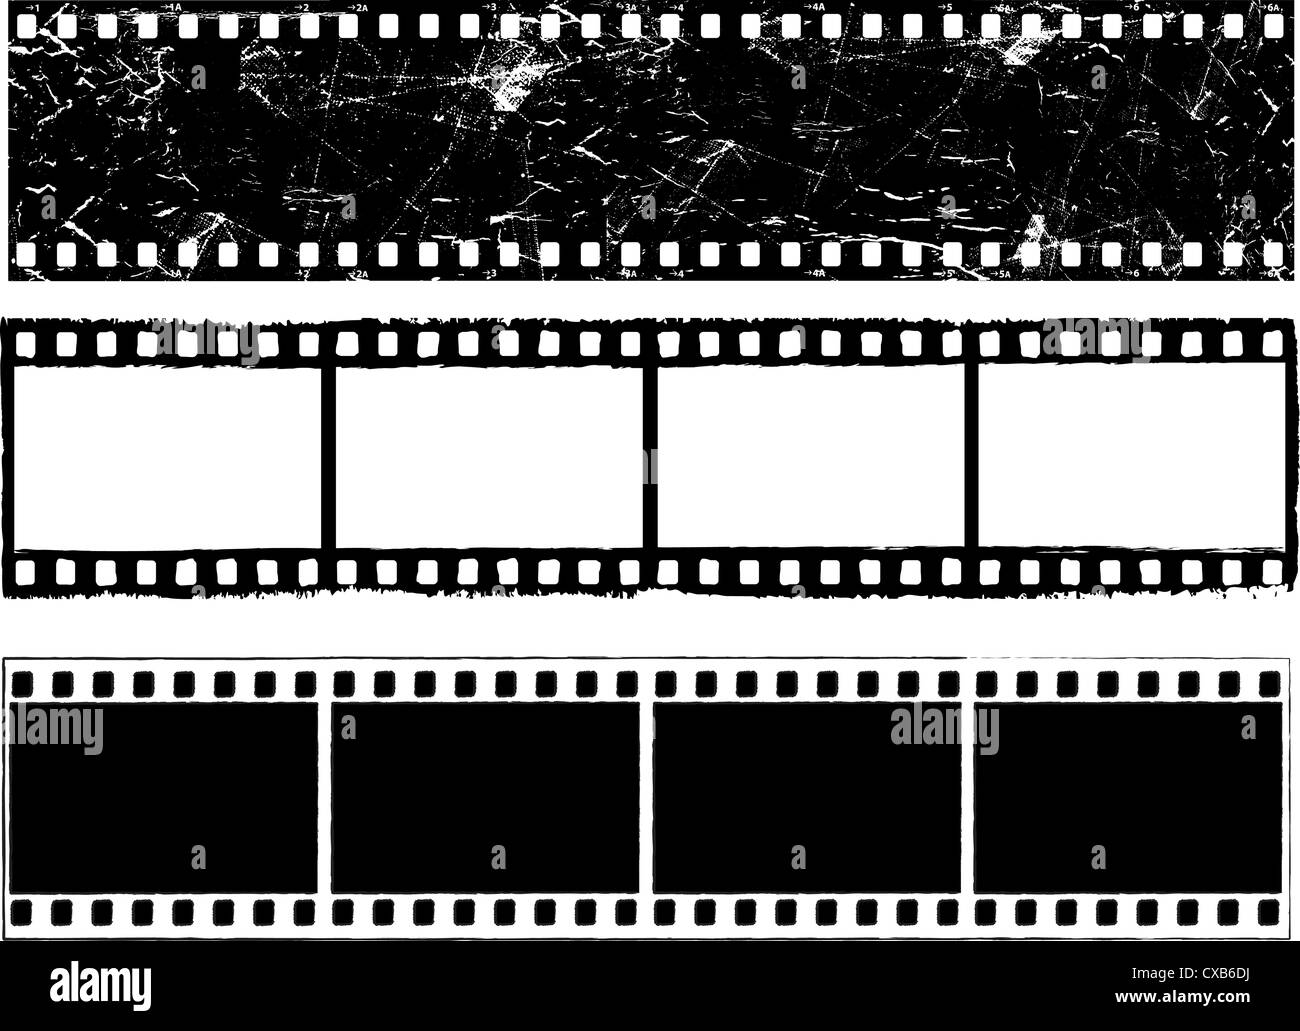 Various designs of grunge styled film strips Stock Photo